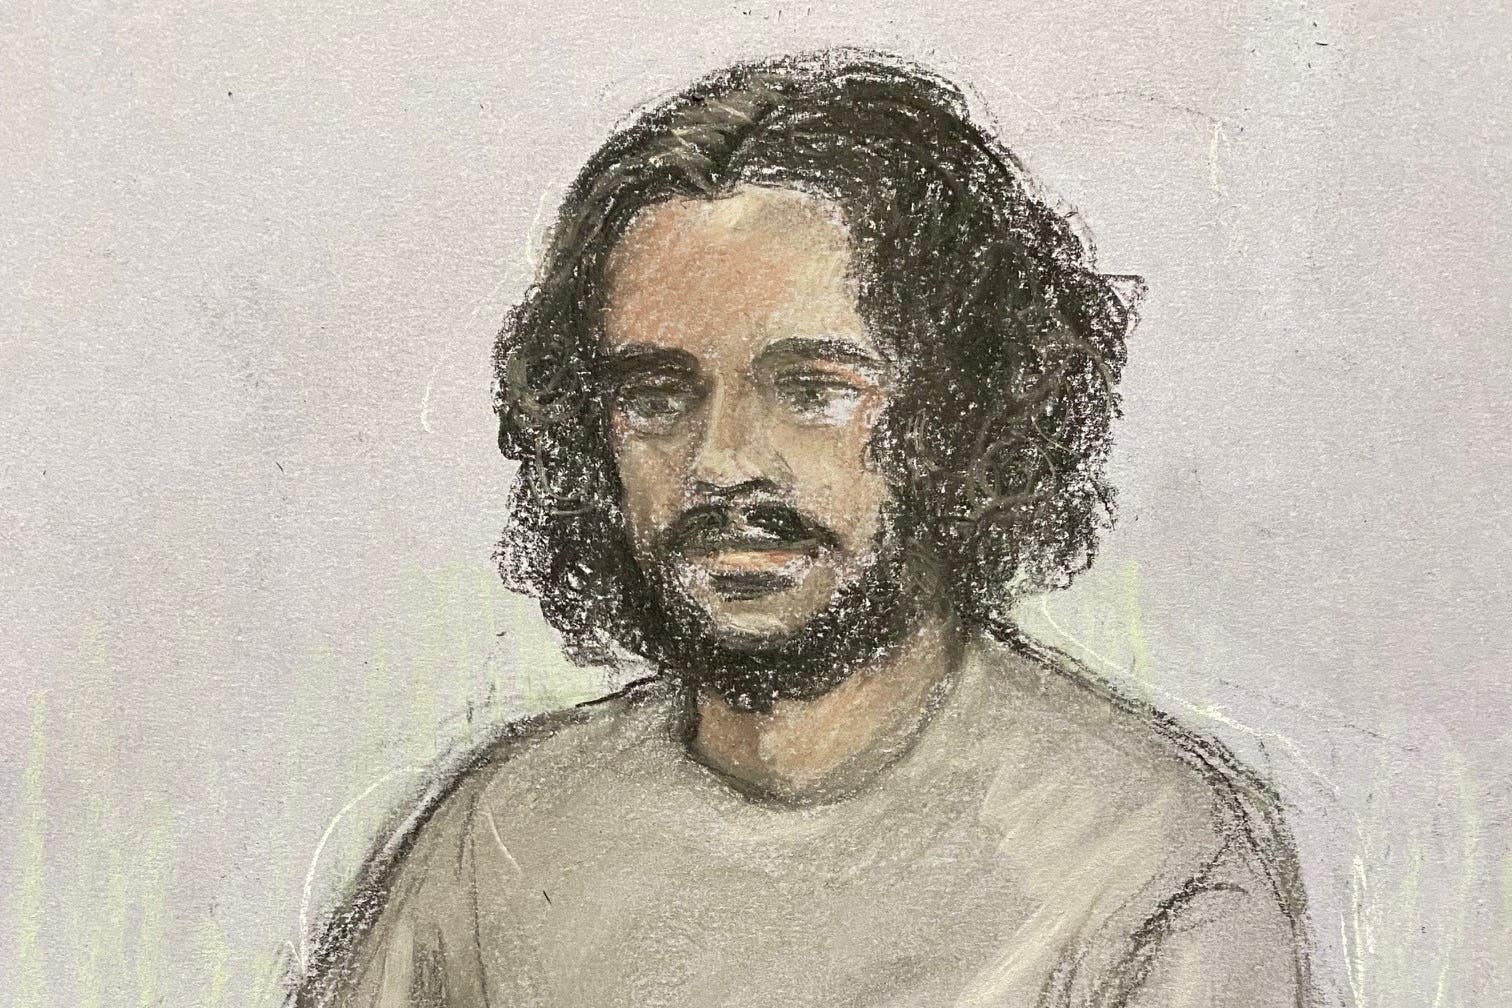 A 21-year-old terrorist has admitted plotting a gun attack in London’s Hyde Park